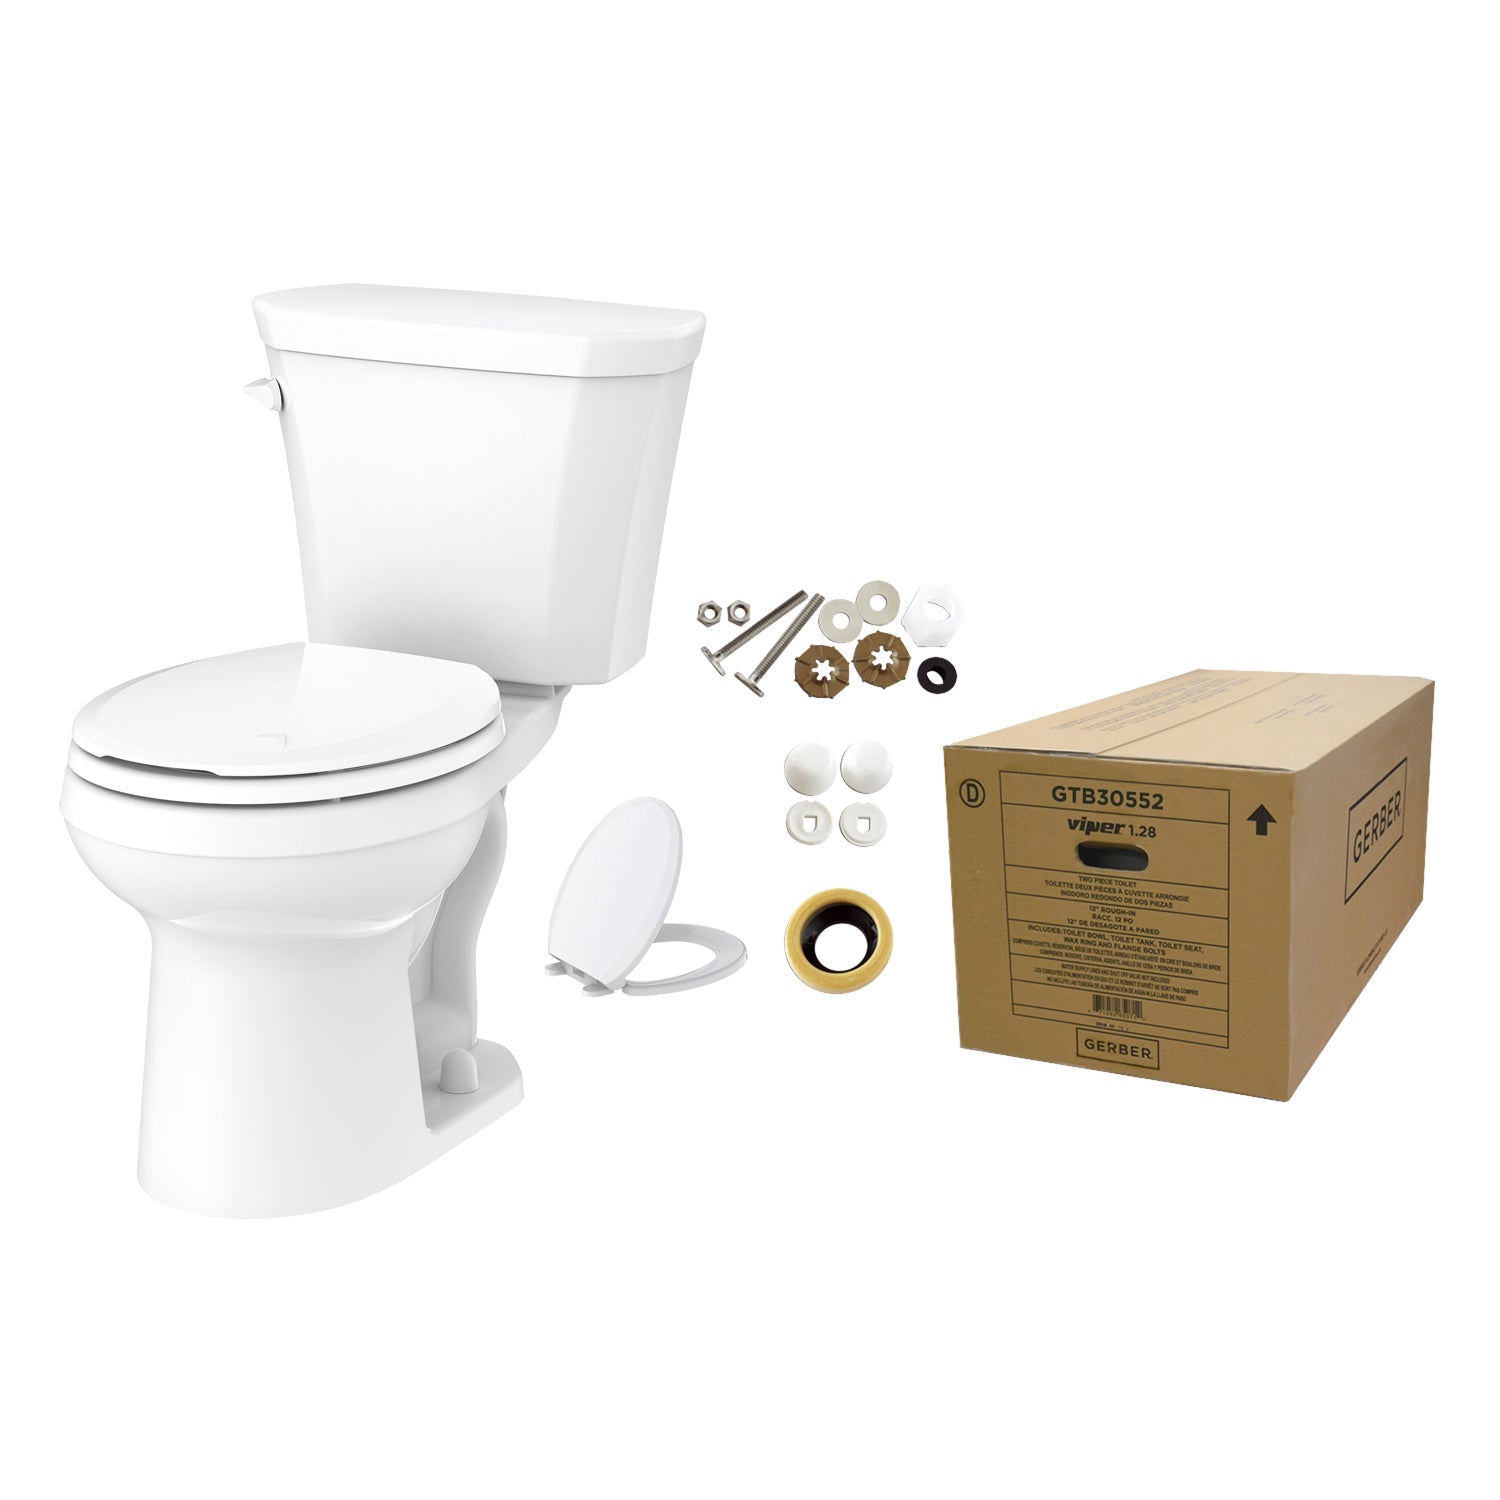 Viper 1.28gpf Round Front Toilet-in Box (Tank and Bowl) White